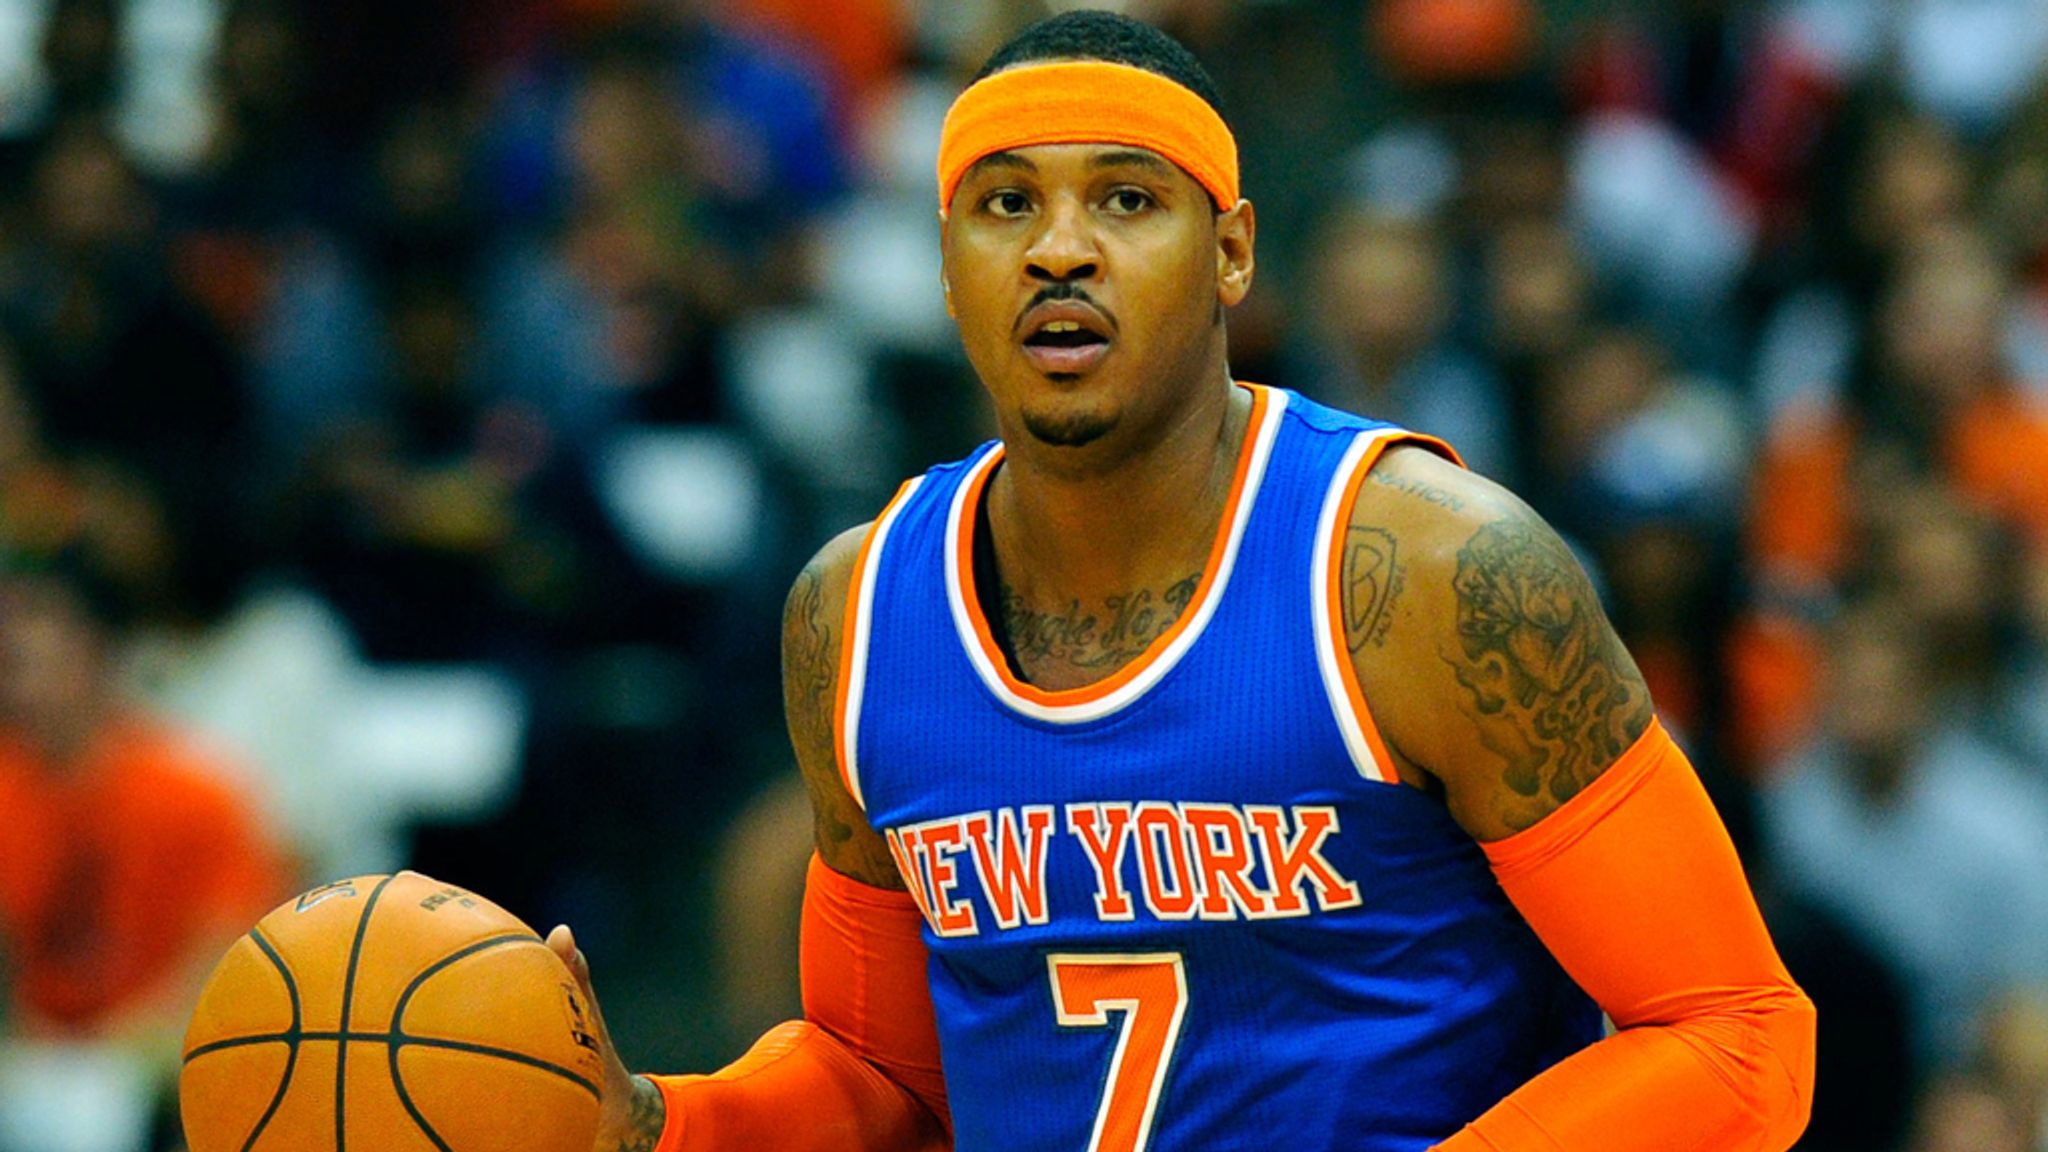 Basketball World Reacts To Carmelo Anthony, Knicks Rumor - The